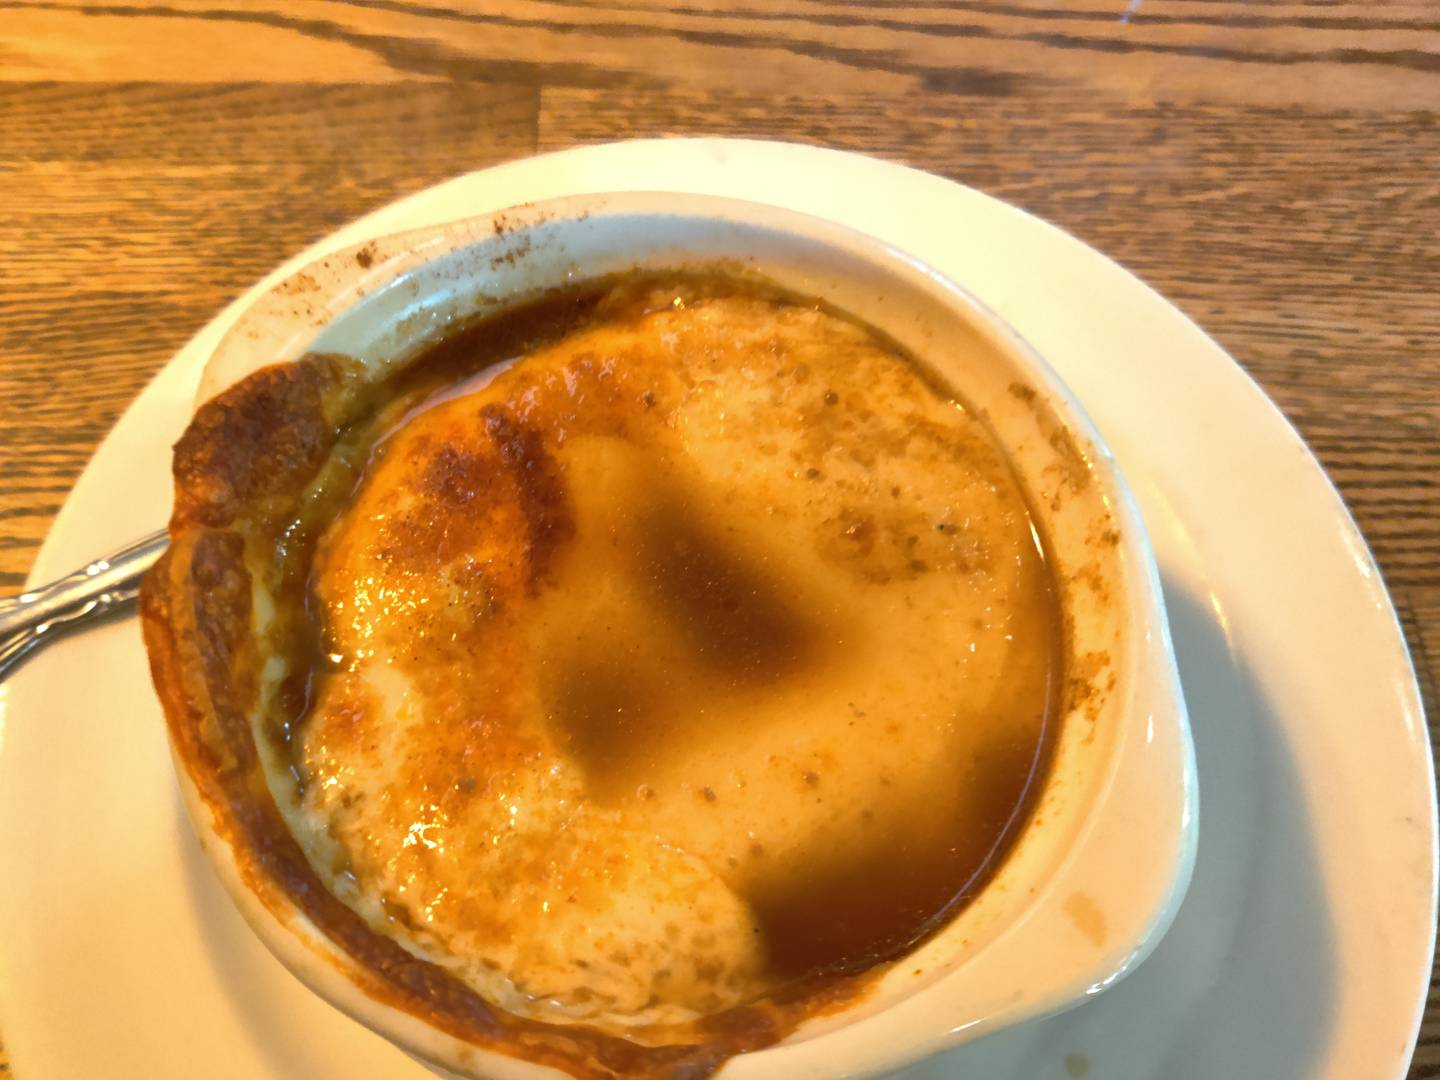 Baked French onion soup at Walnut SpeakEasy in Elgin.